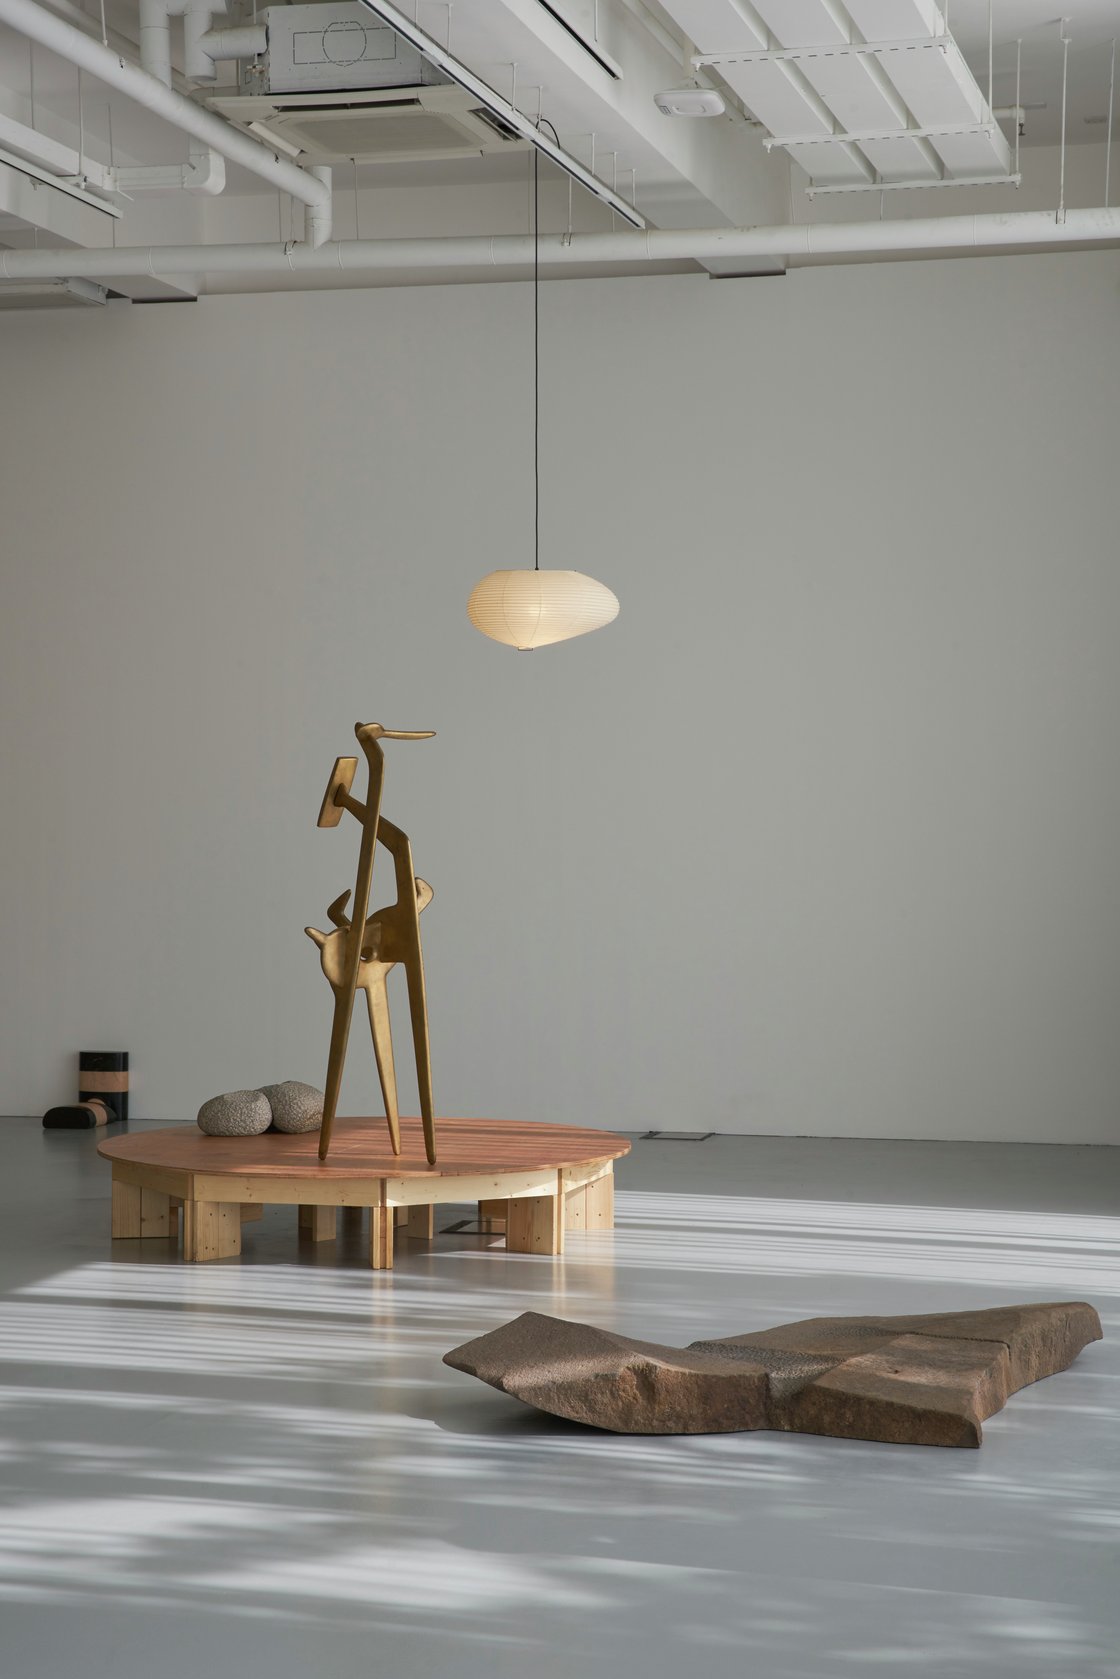 Noguchi for Danh Võ: Counterpoint